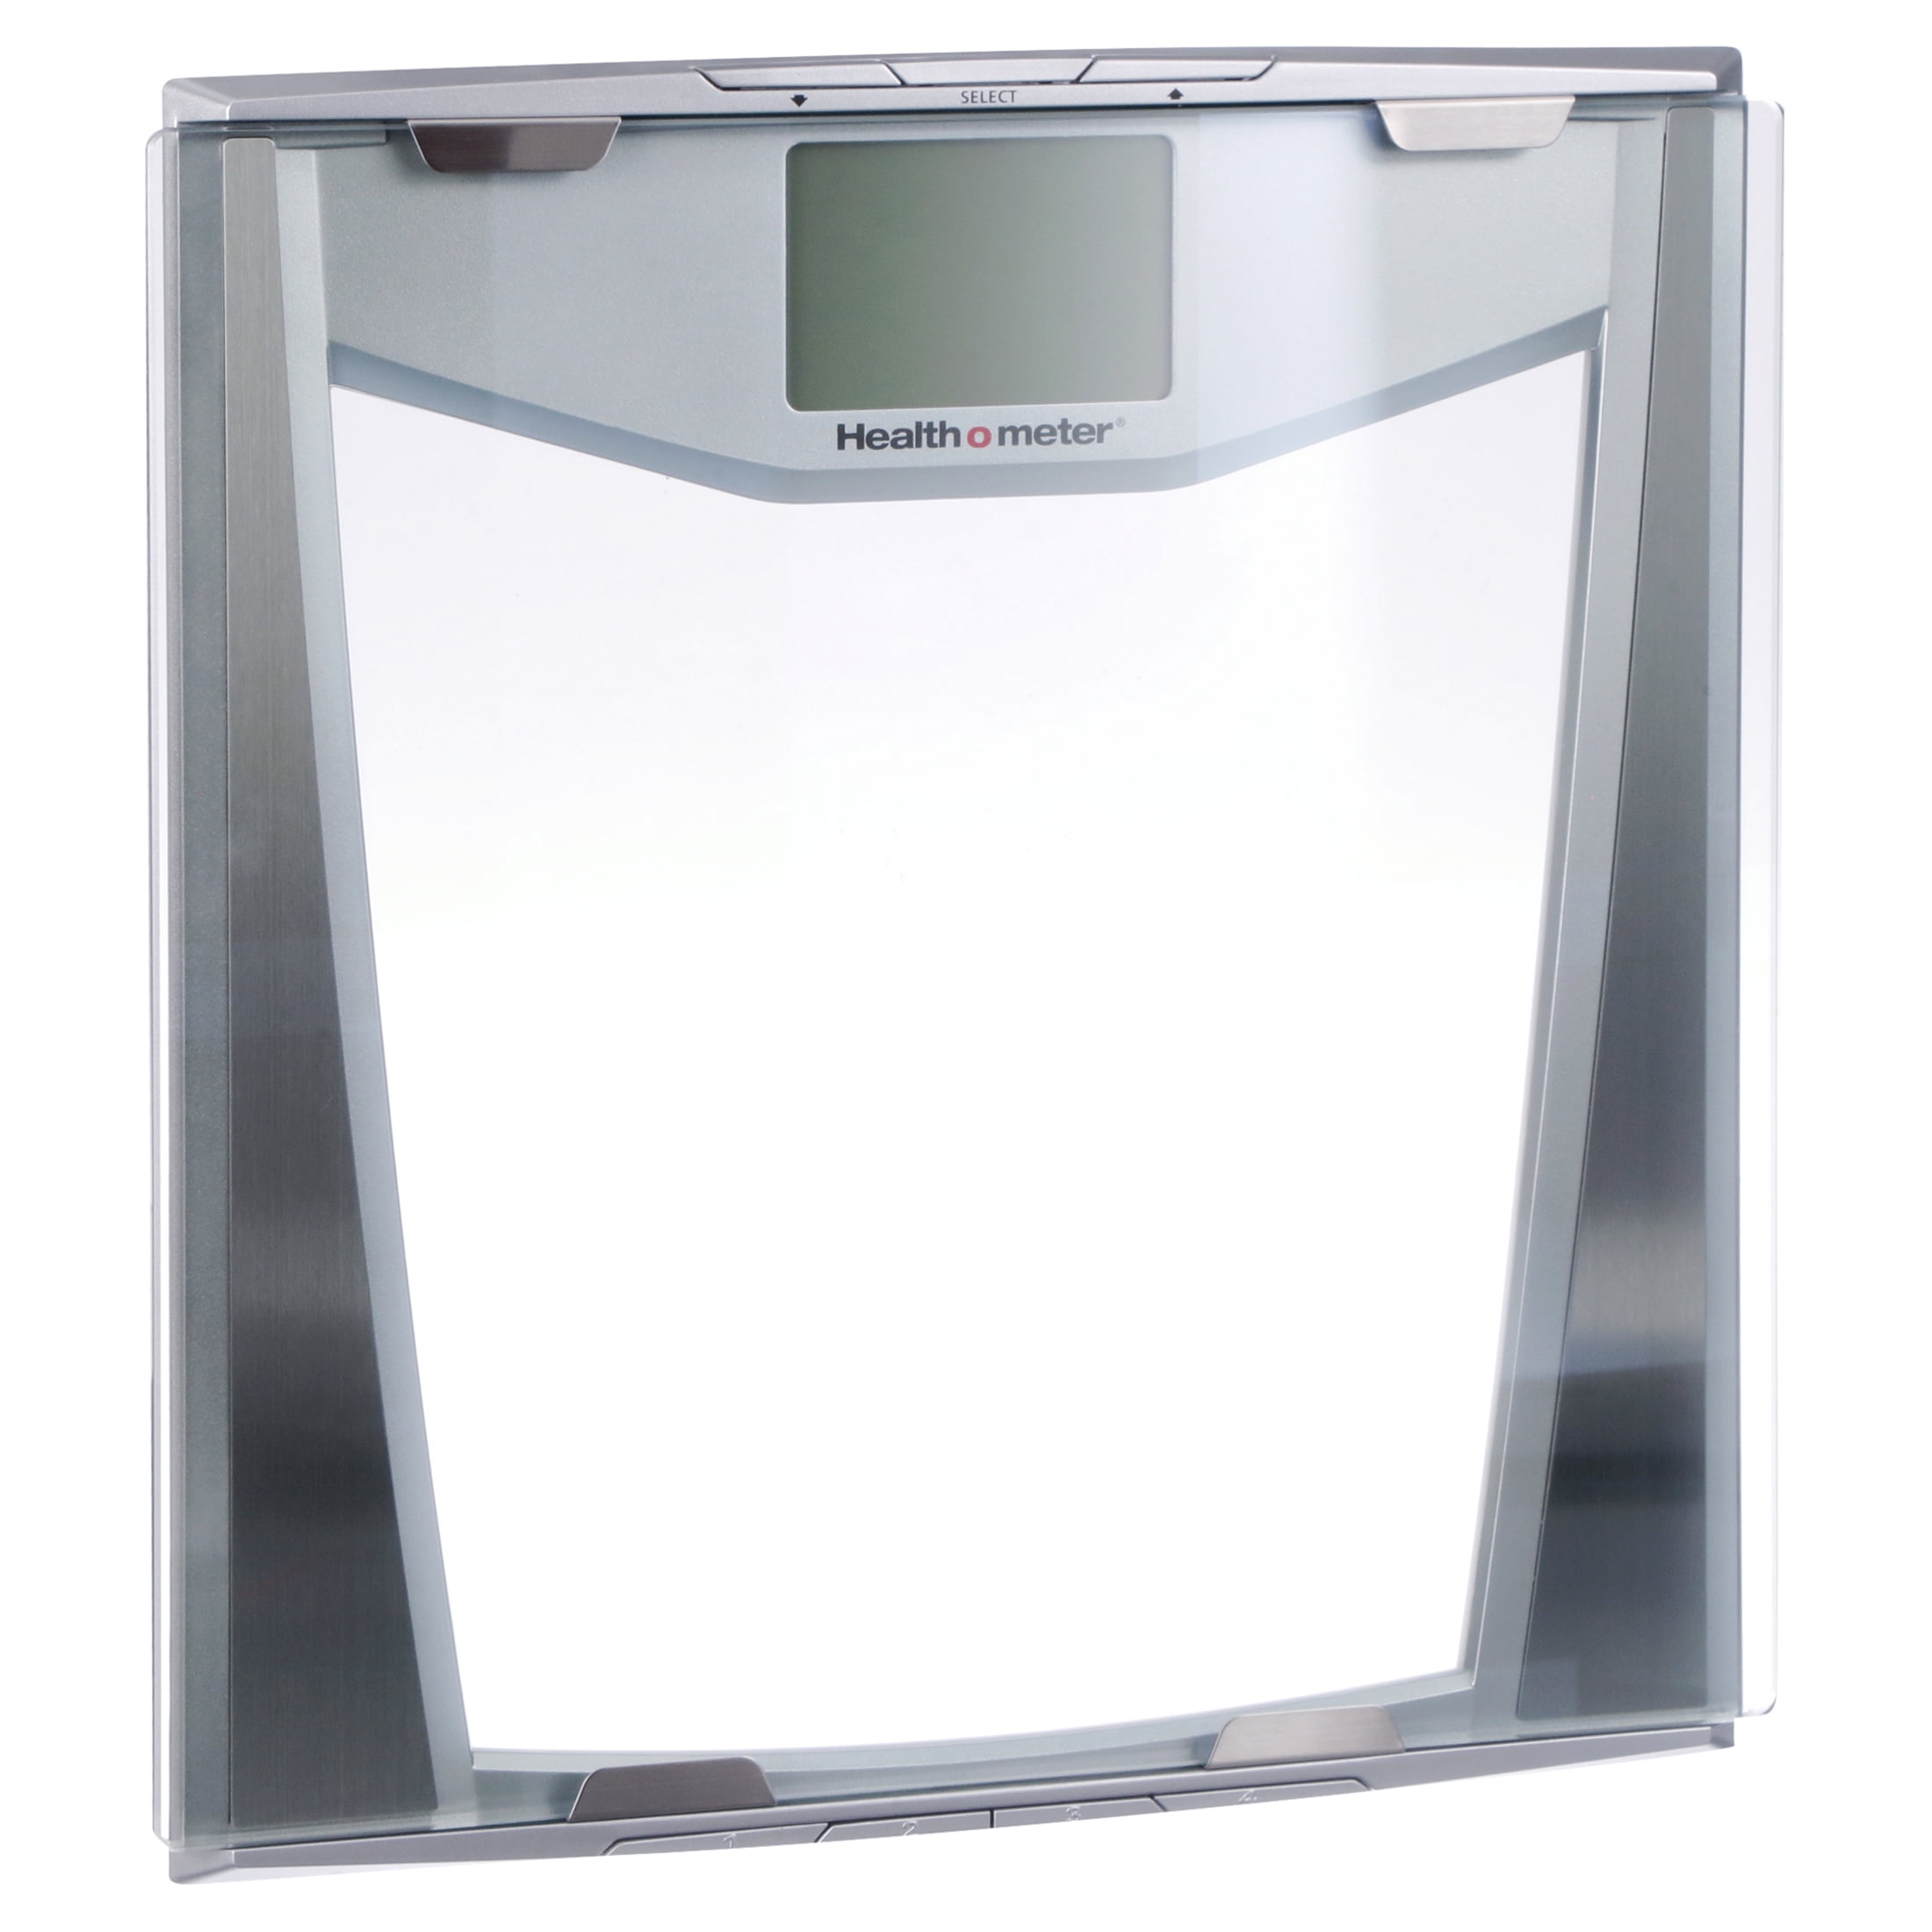 Angel USA W79G8FY ANGEL USA Medical High Precision Physician Digital Scale,  Body Weight Doctor Weighing Balance Health Fitness